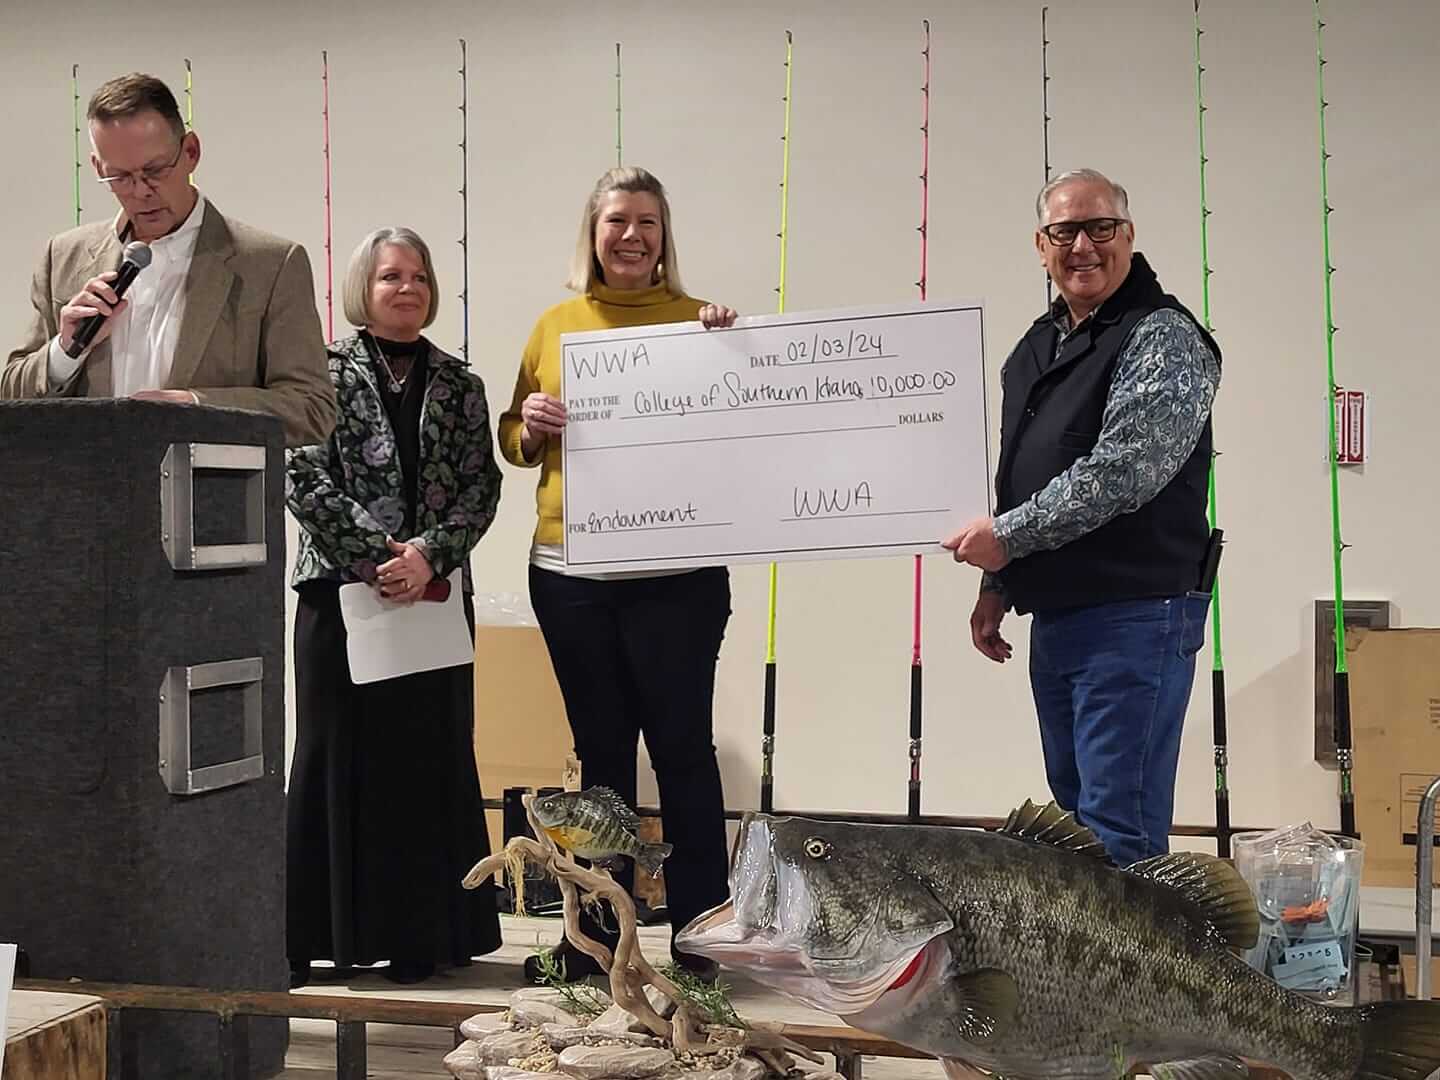 Featured image for “Western Whitewater Association Establishes New Endowment at College of Southern Idaho to Support Aquaculture Education”